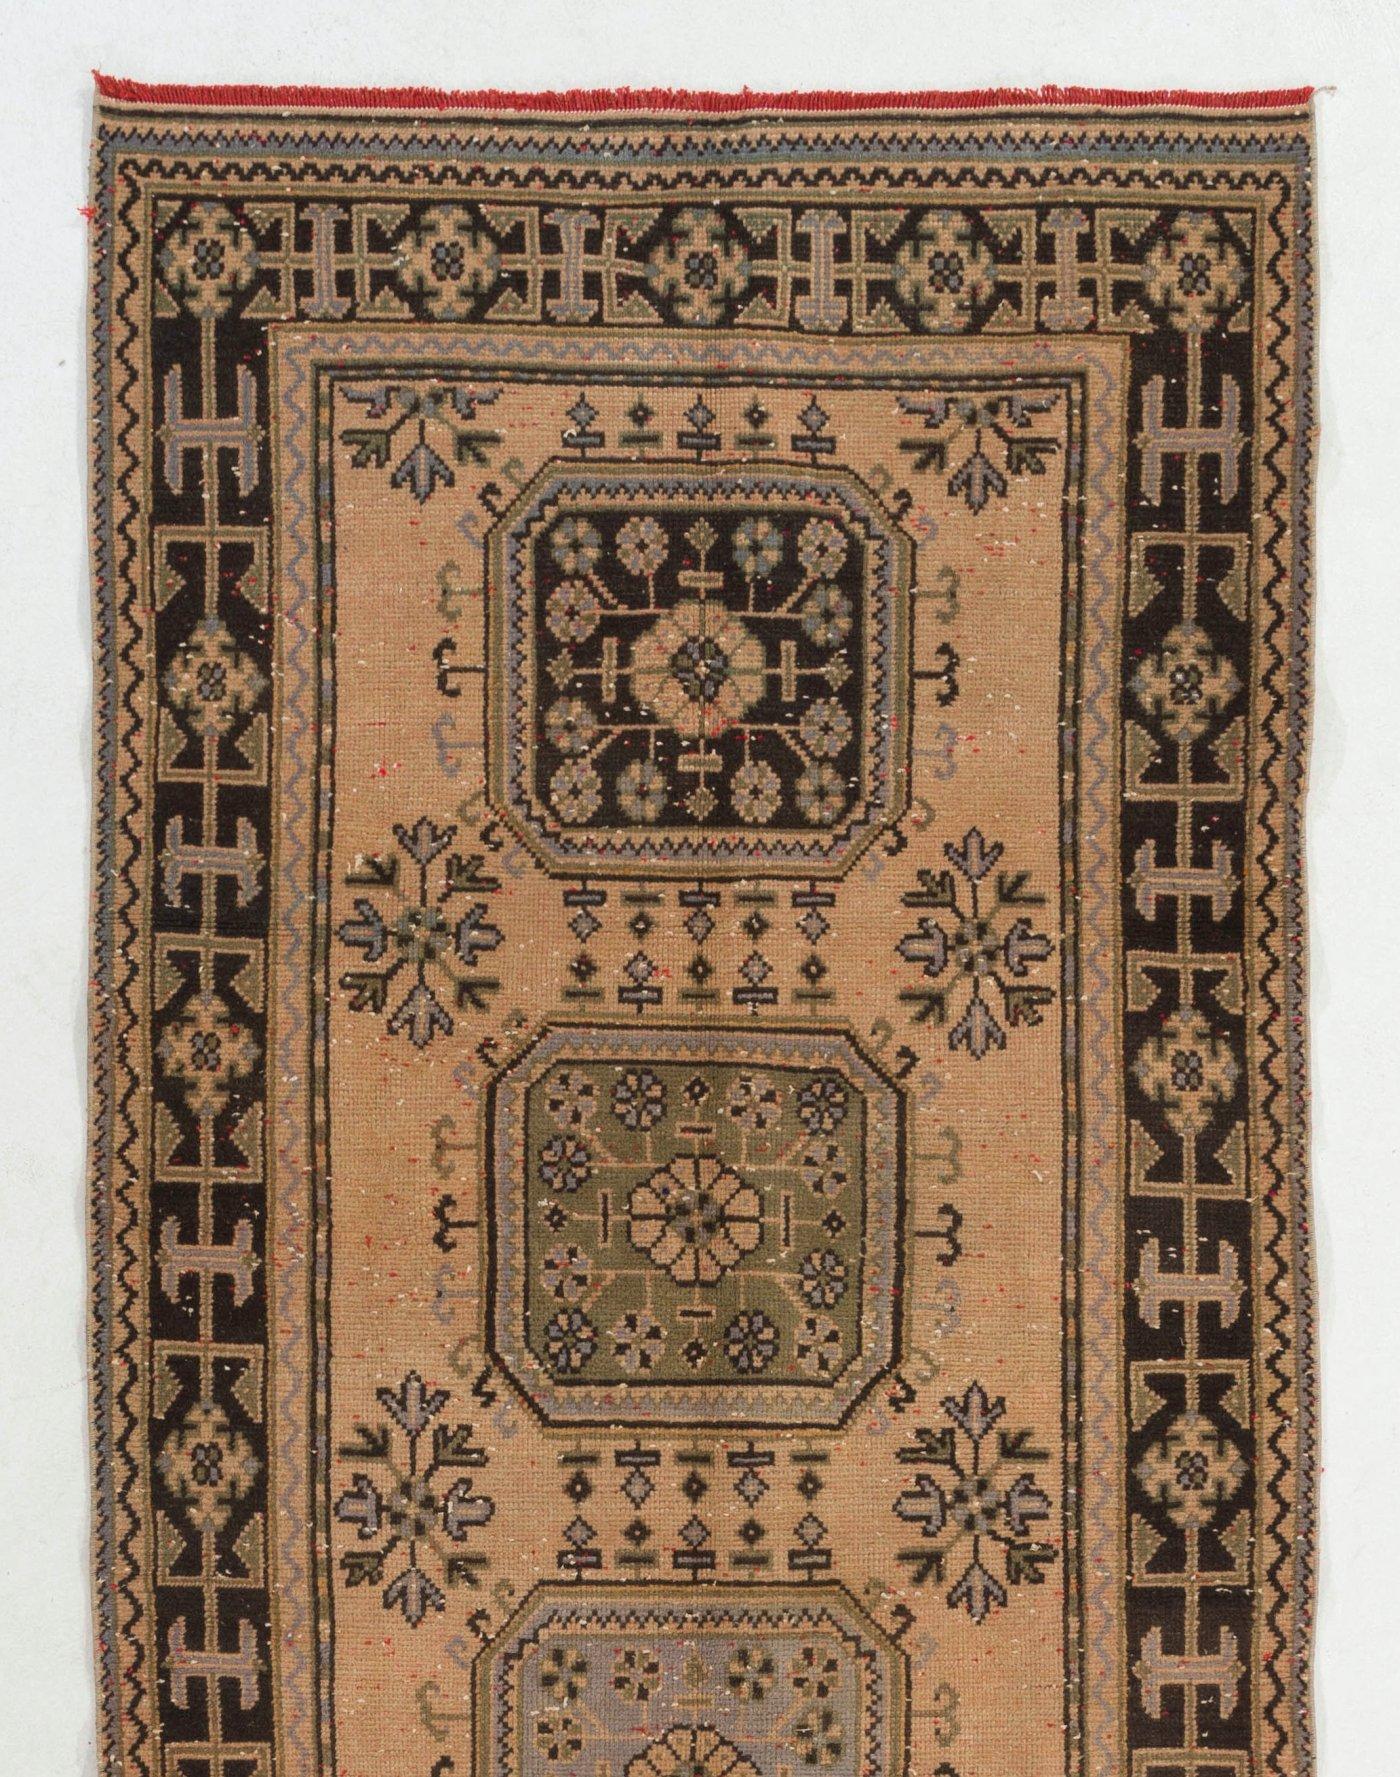 A gorgeous vintage Turkish runner rug for hallway decor. It was hand-knotted in the 1960s with low wool on cotton foundation and features a multiple medallion design. It is in very good condition, professionally-washed, sturdy and suitable for areas